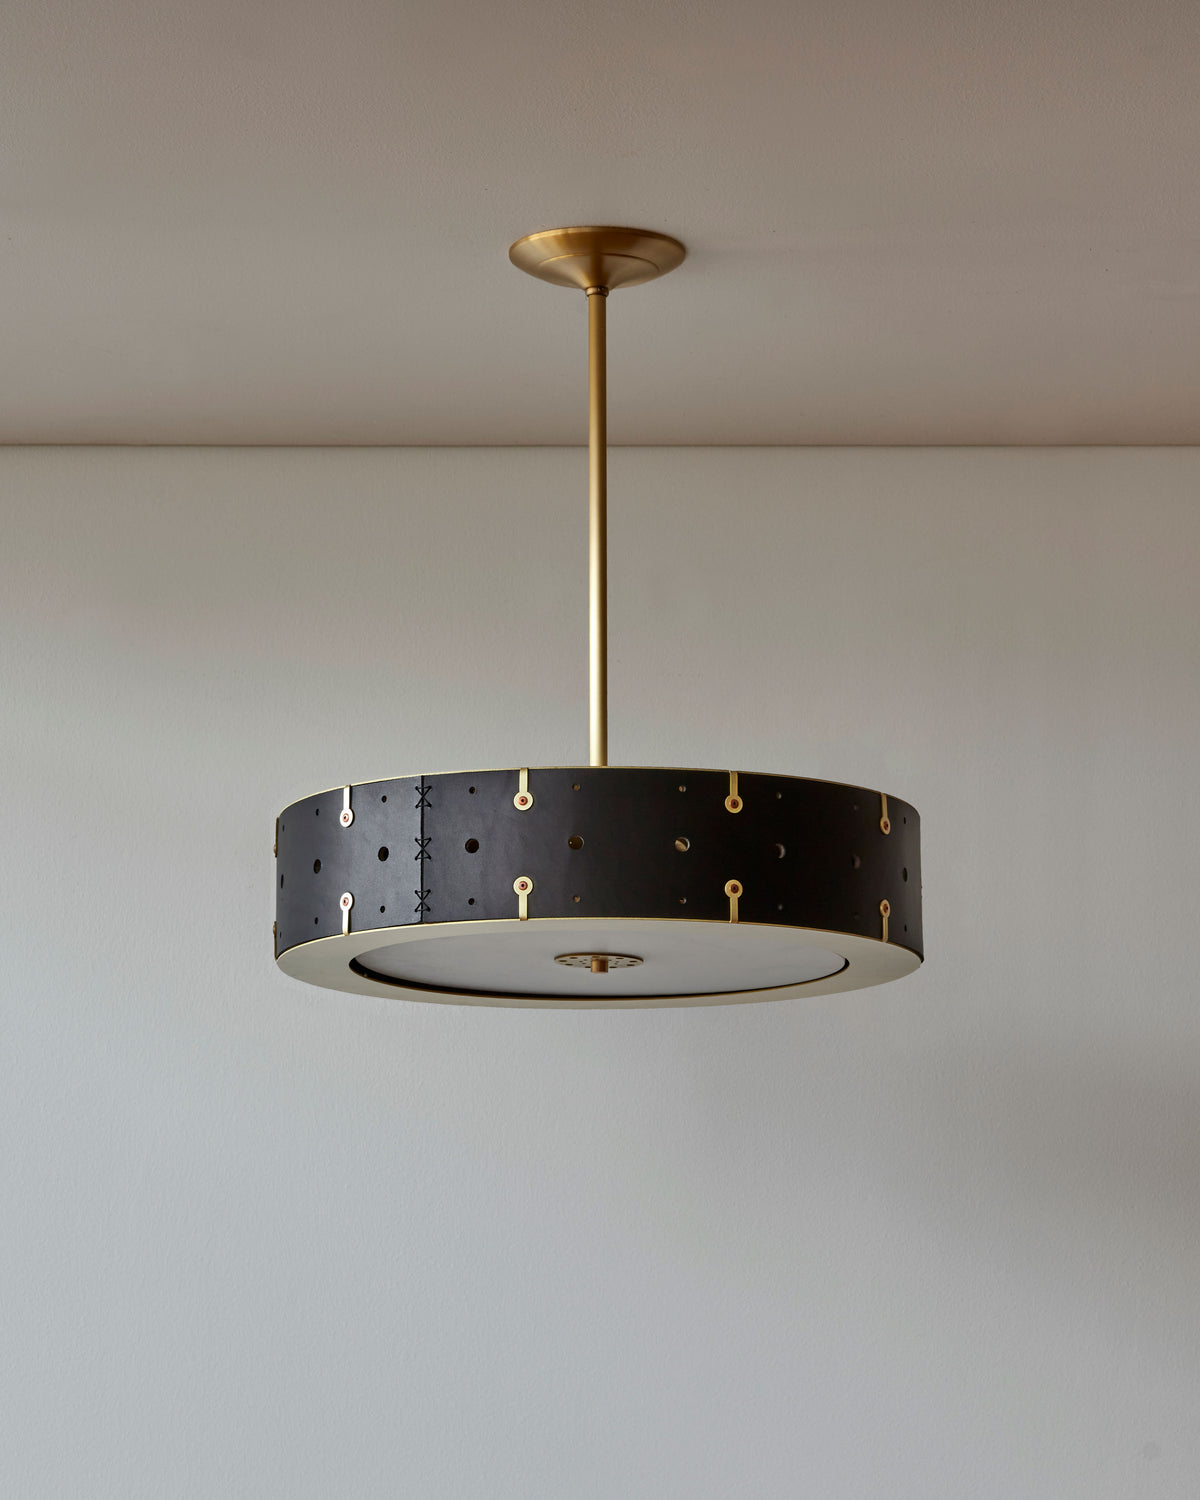 Beautiful satin brass ceiling pendant fixture with handstitched leather drum shade and customizable drop 